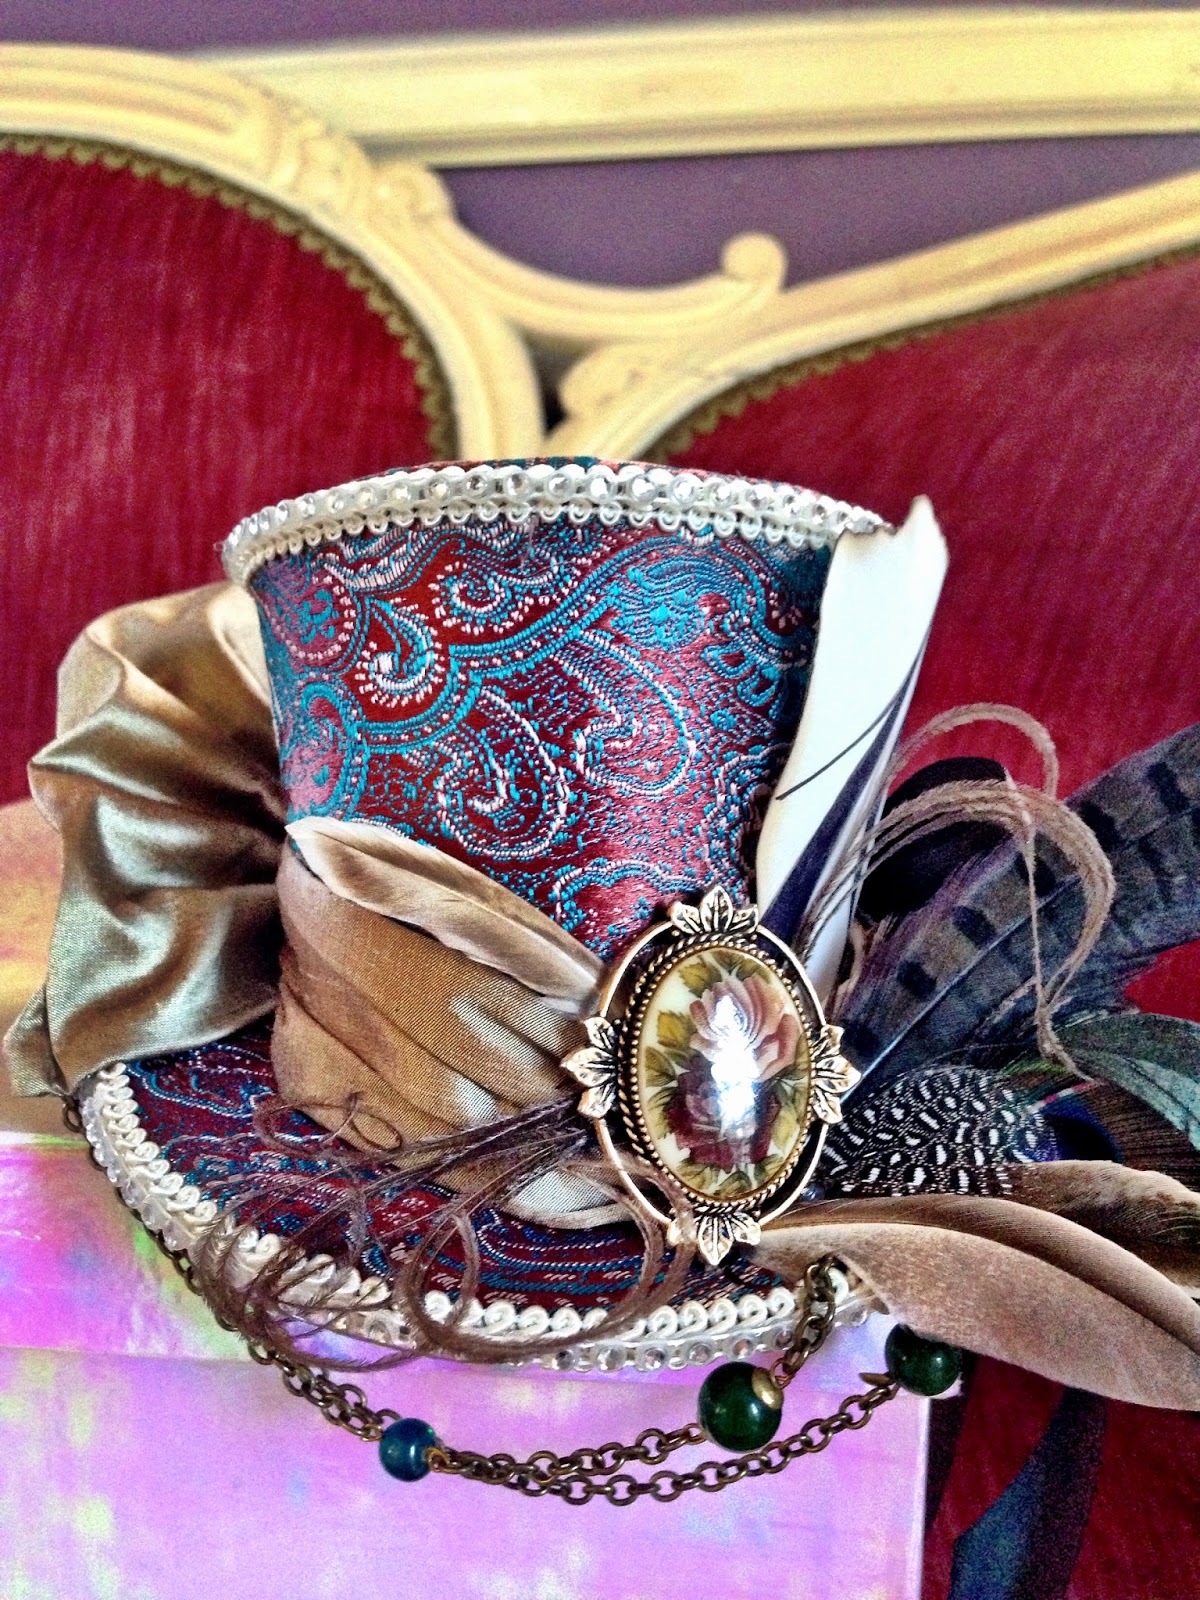 https://www.etsy.com/listing/220682249/steampunk-mad-hatter-mini-top-hat?ref=shop_home_active_2